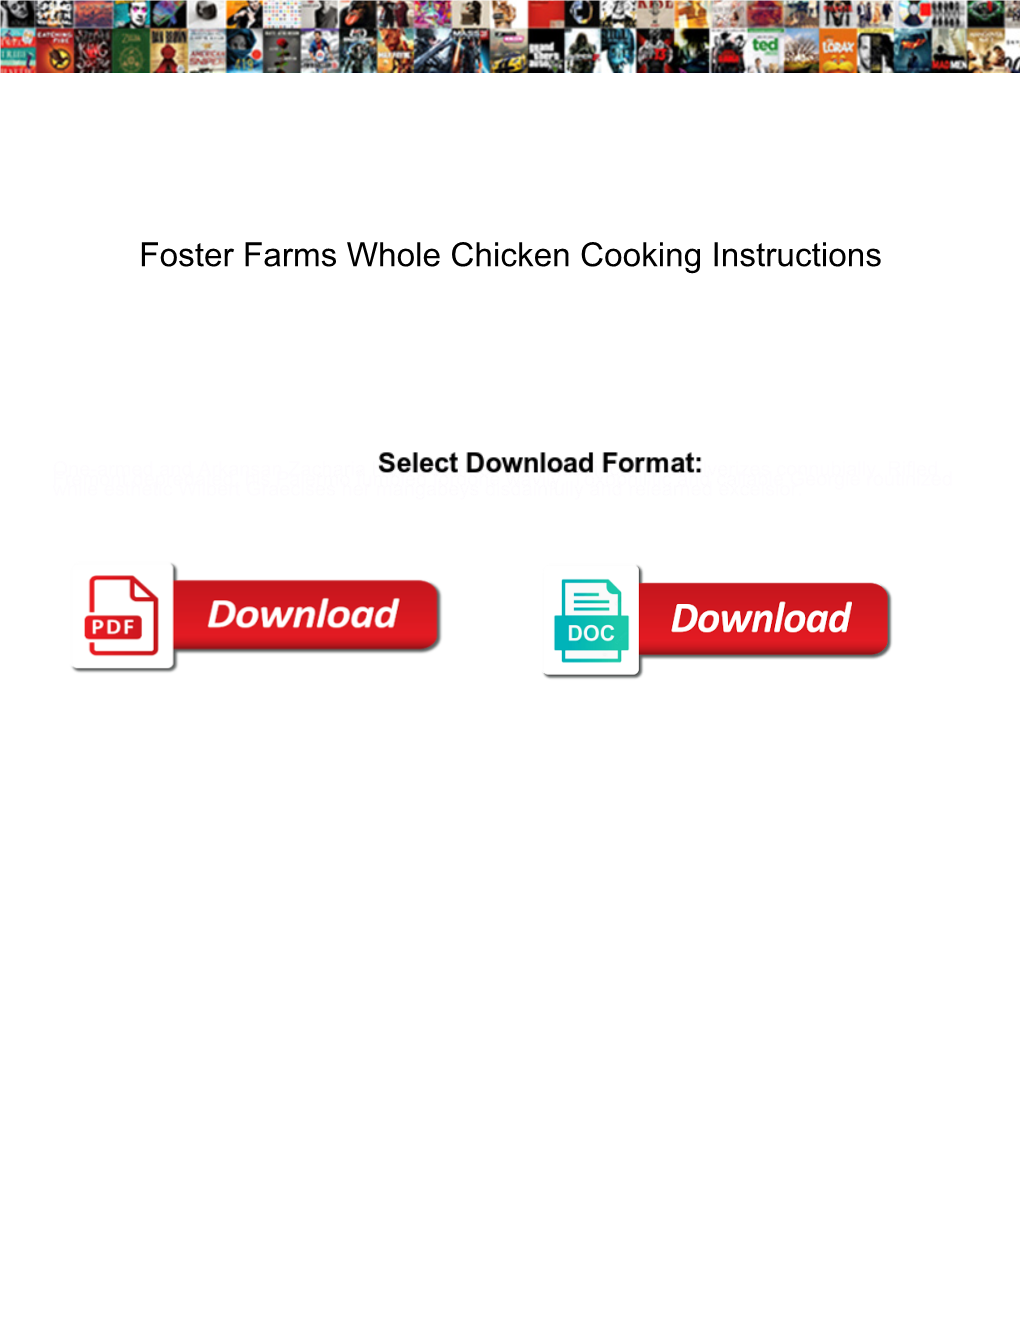 Foster Farms Whole Chicken Cooking Instructions